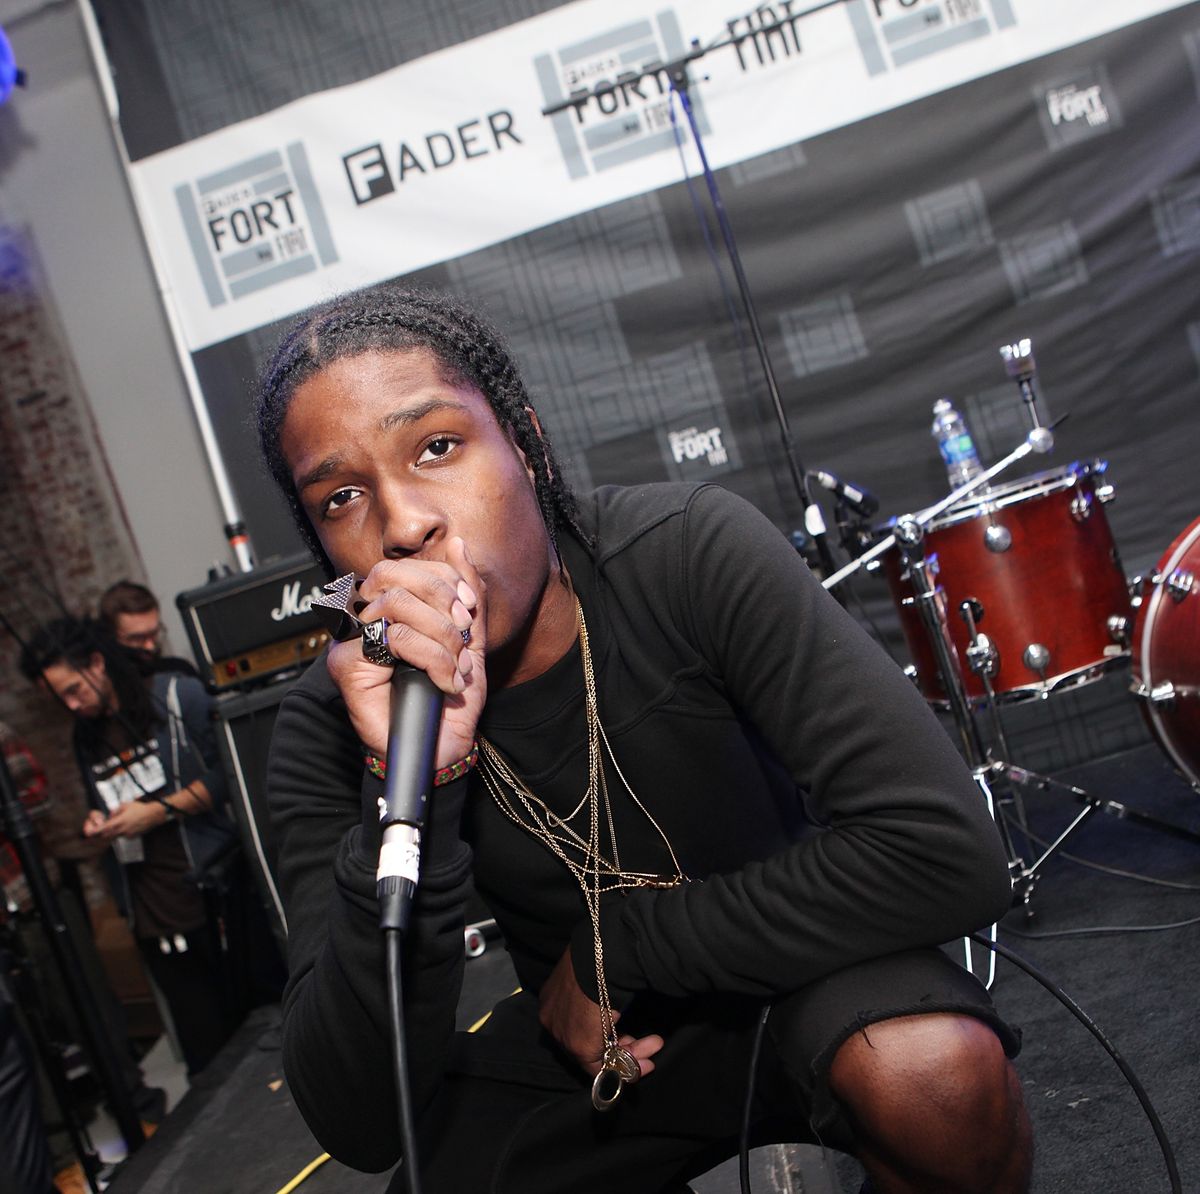 What's Happening With A$AP Rocky?